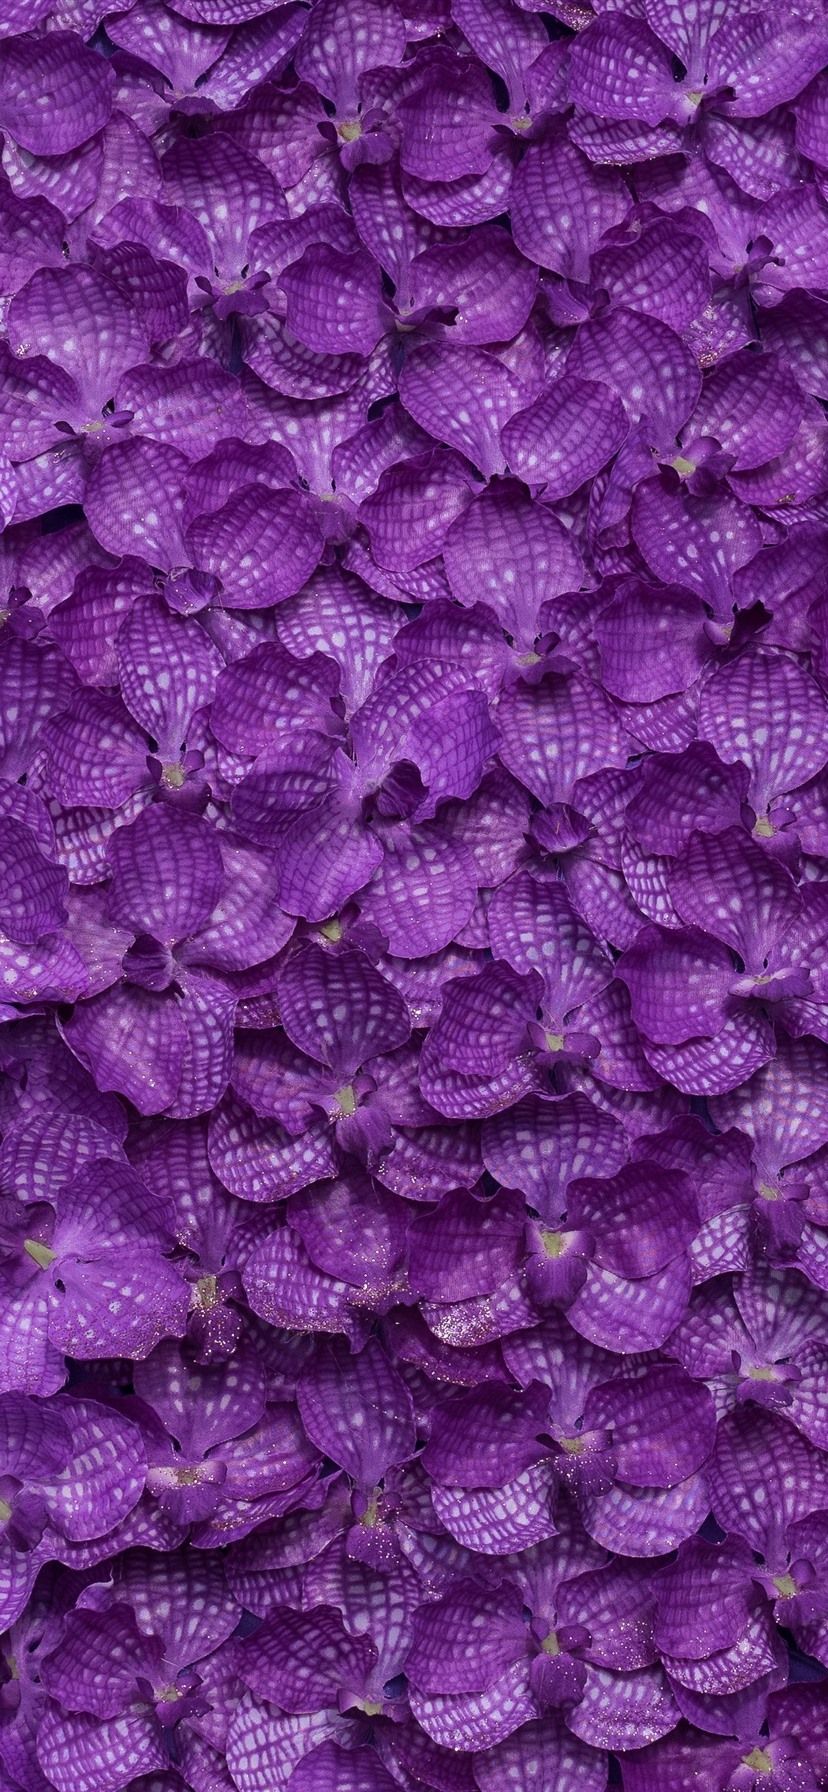 Phalaenopsis, Many Purple Flowers Background 1125x2436 IPhone 11 Pro XS X Wallpaper, Background, Picture, Image